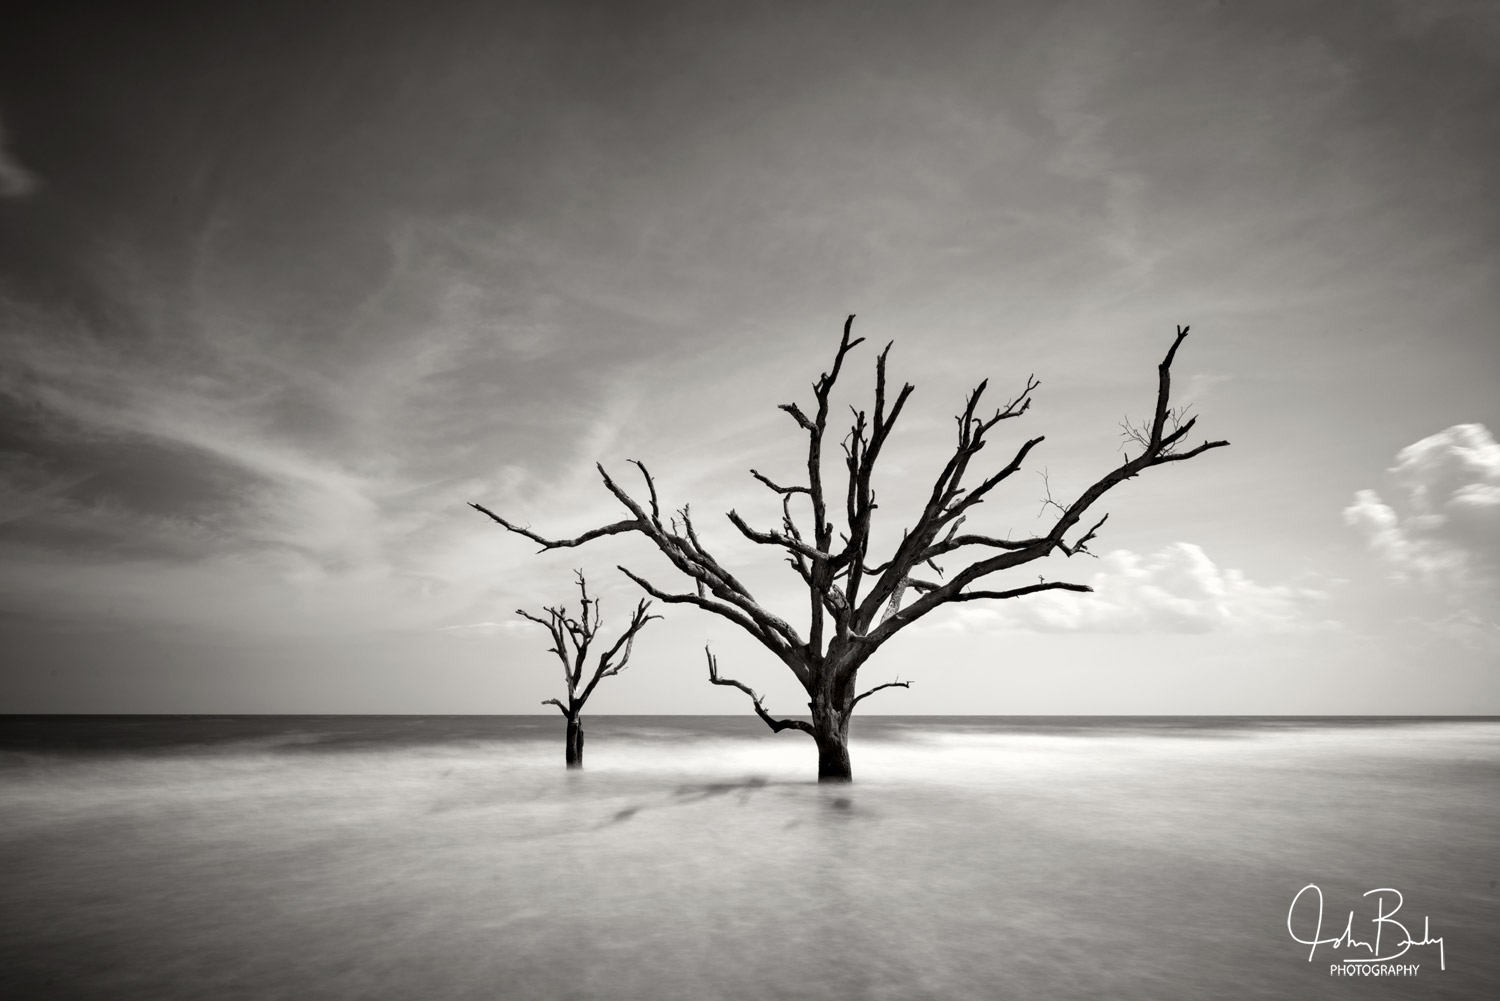 Botany Bay is a beach area located on Edisto Island South of Charleston South Carolina. This driftwood beach has been left undisturbed...